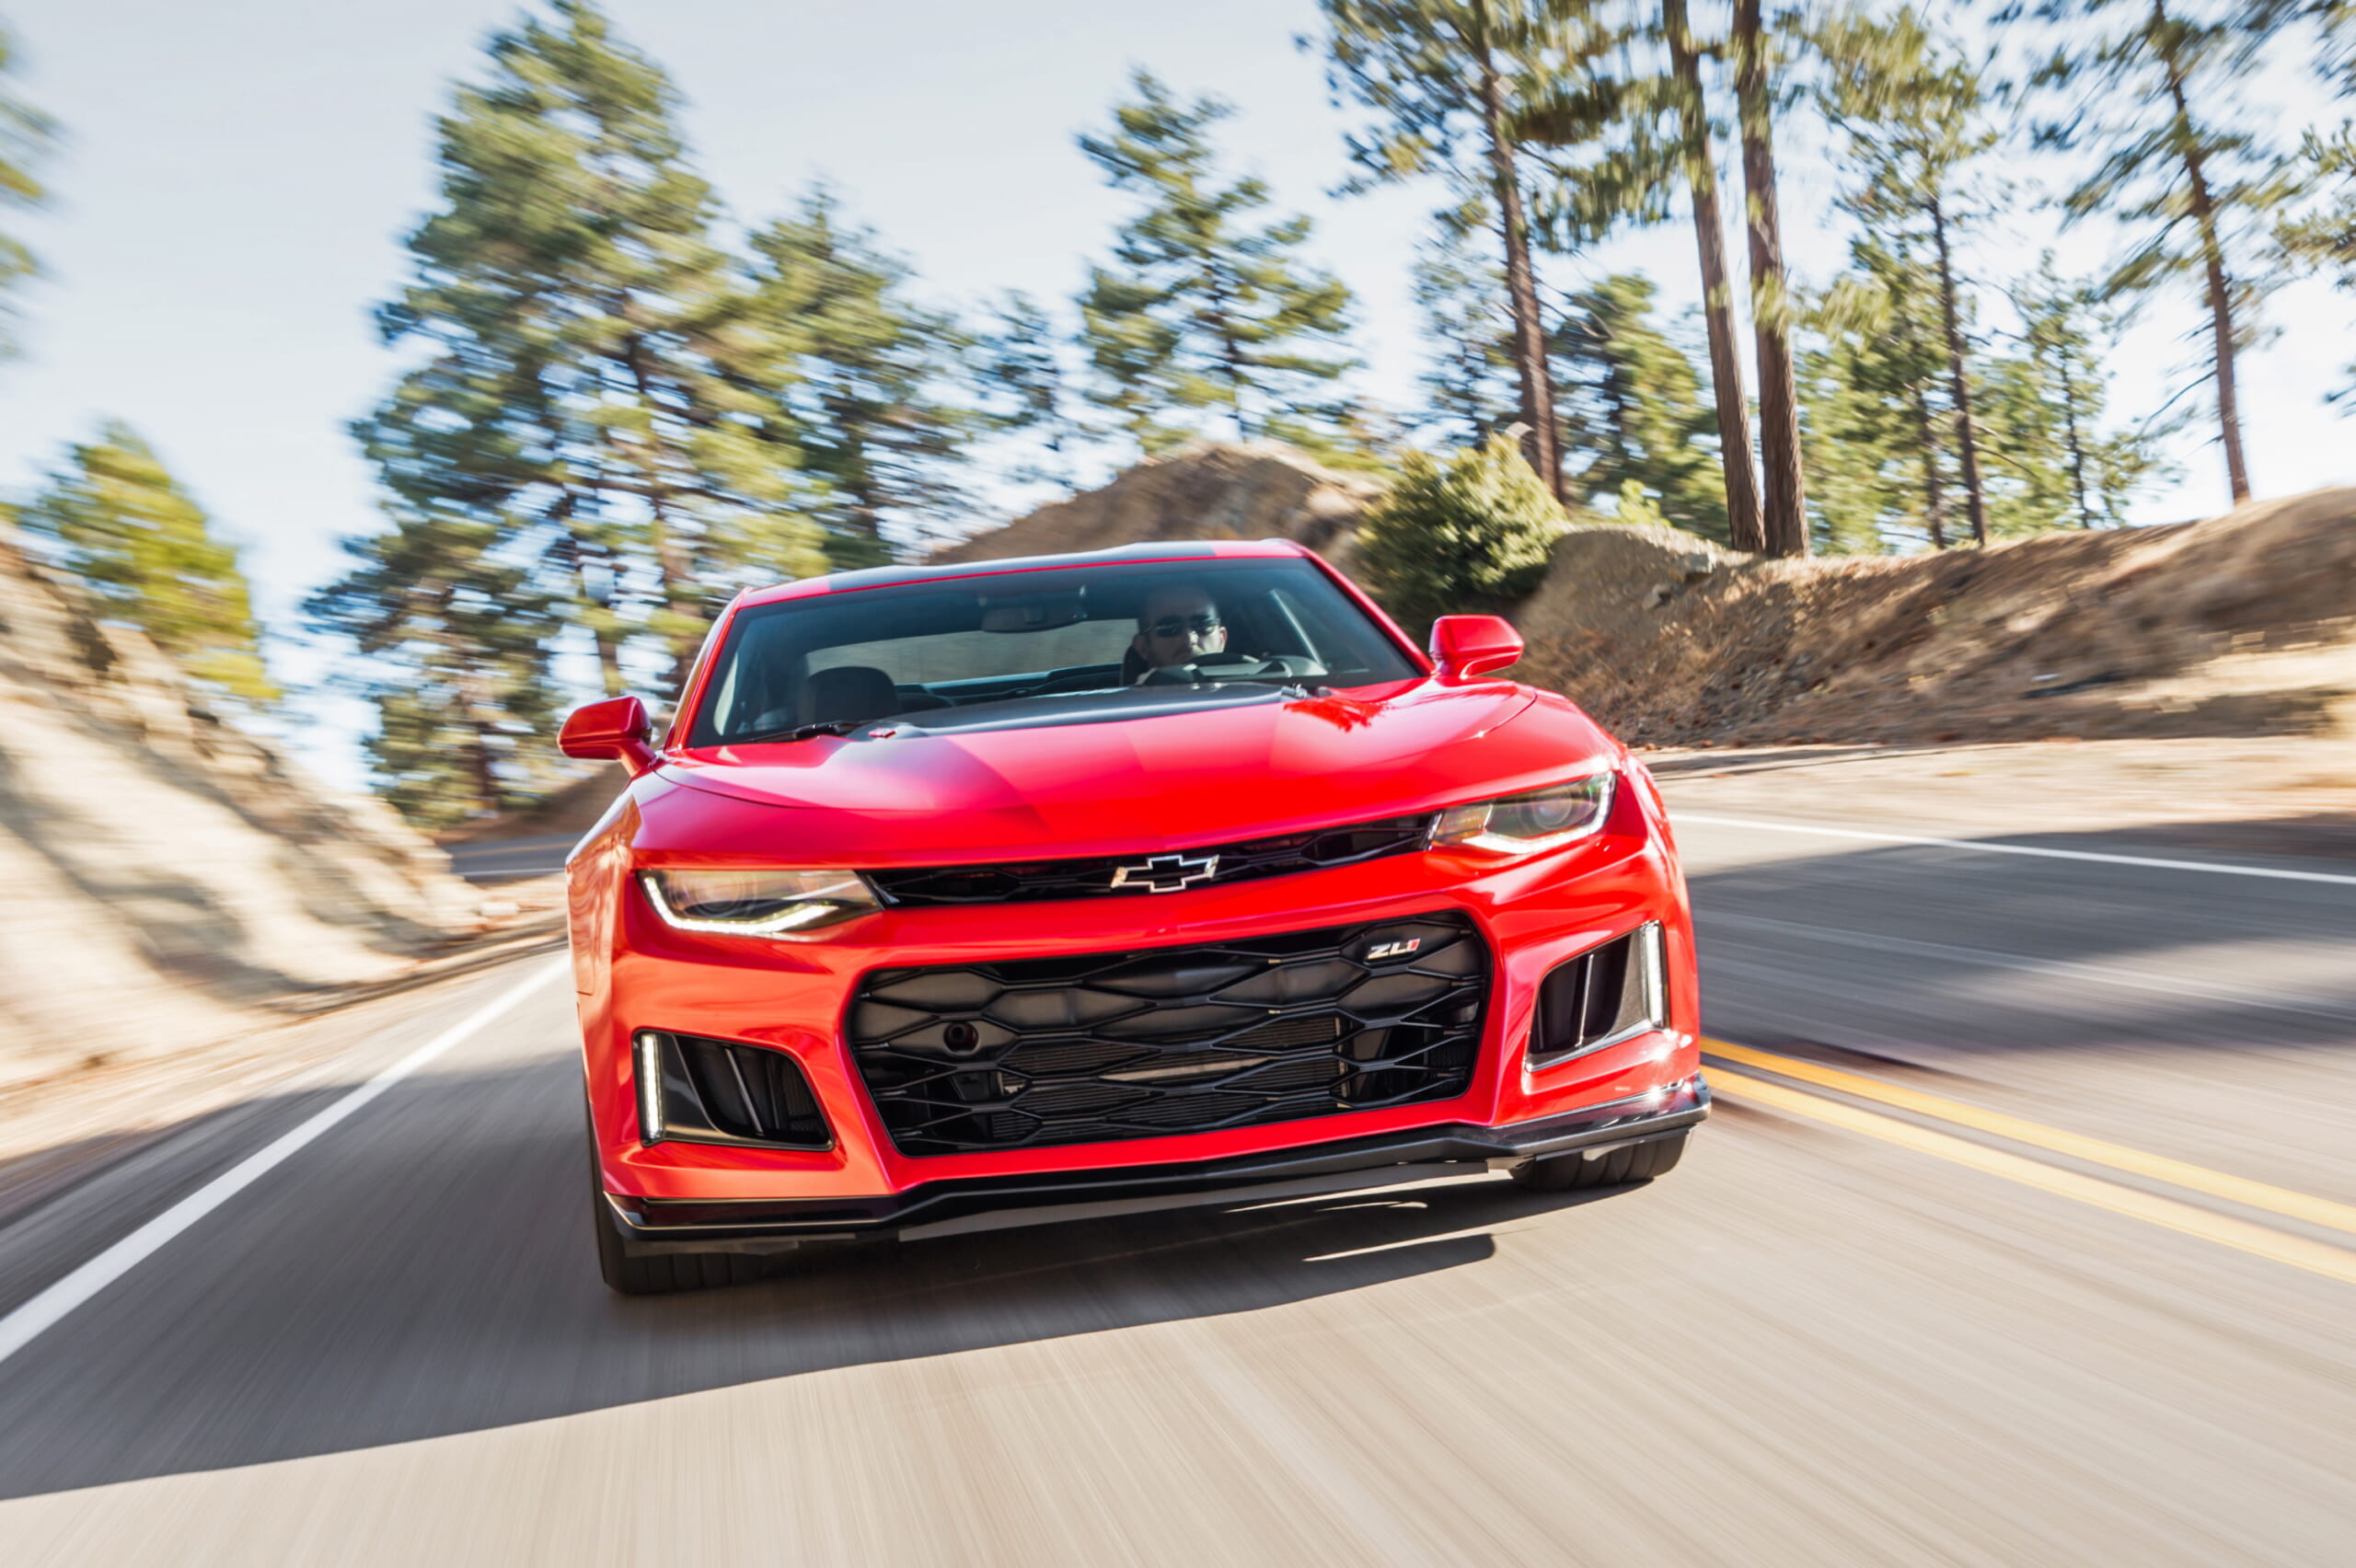 The Camaro ZL1 Hits an Official Top Speed of 198 MPH, Which Is Very